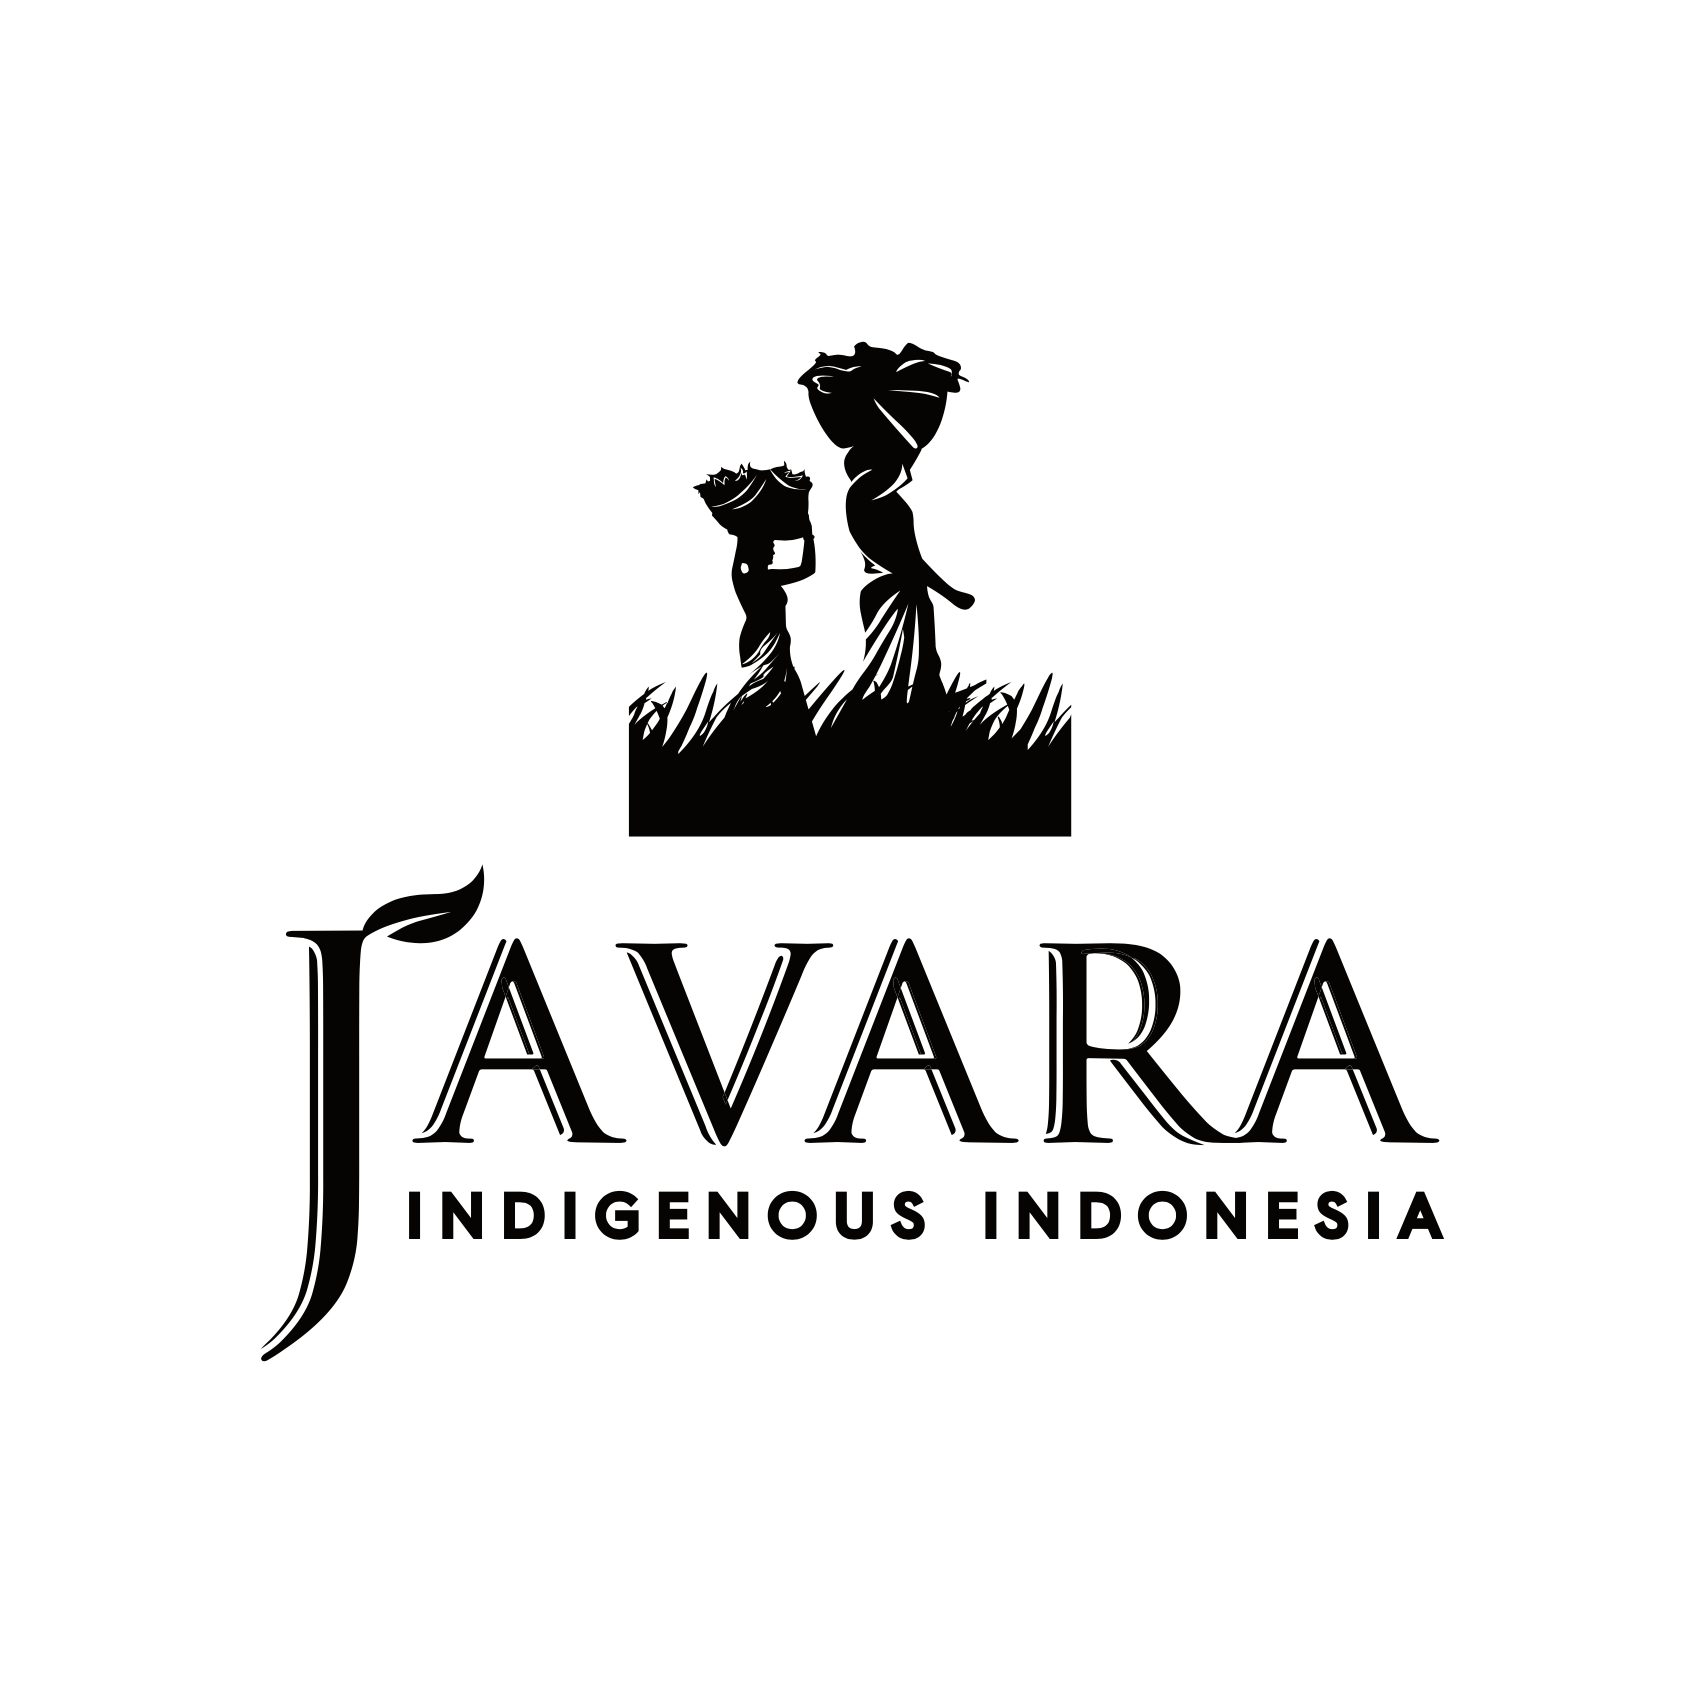 Logo of Javara, Indigenous Indonesia, with the brand name in black font on a white background.